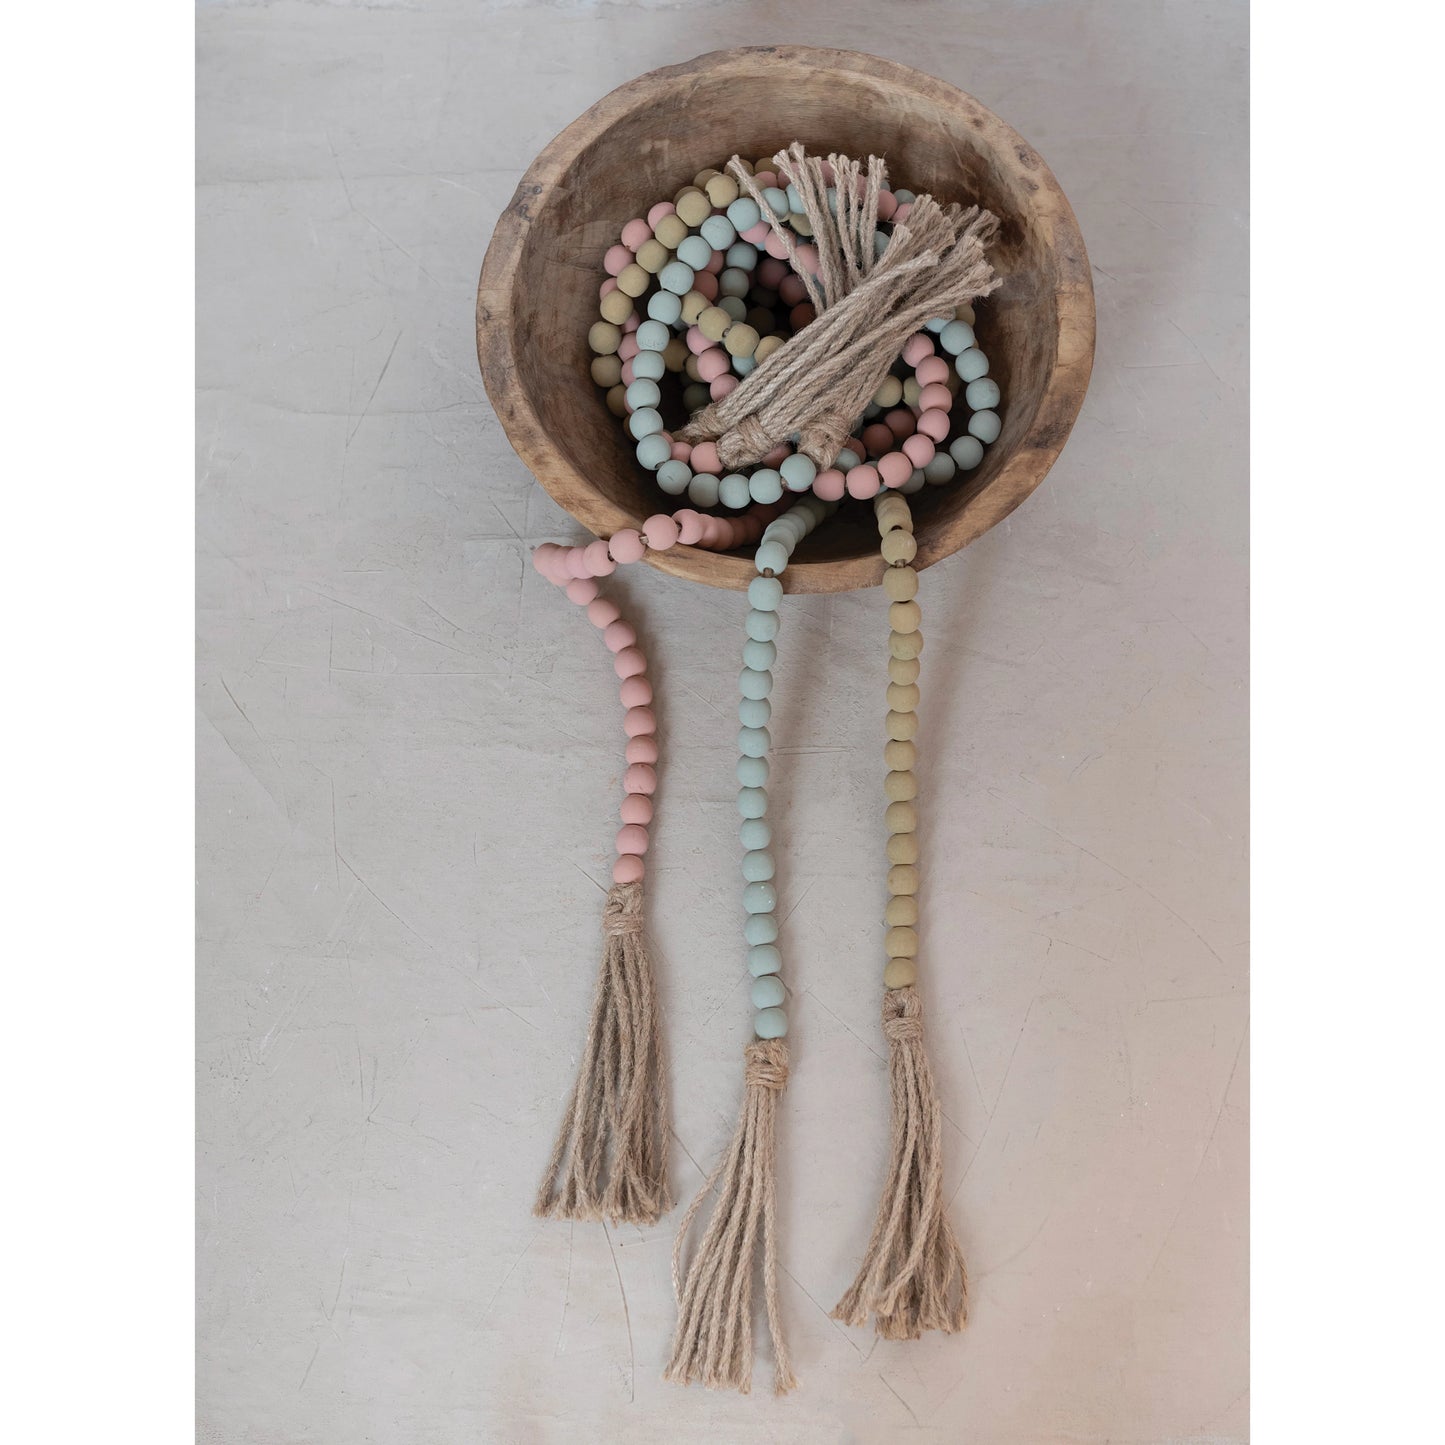 Pastel Colored Wood Garland at 6Whiskey six whisky spring home decor easter tassels